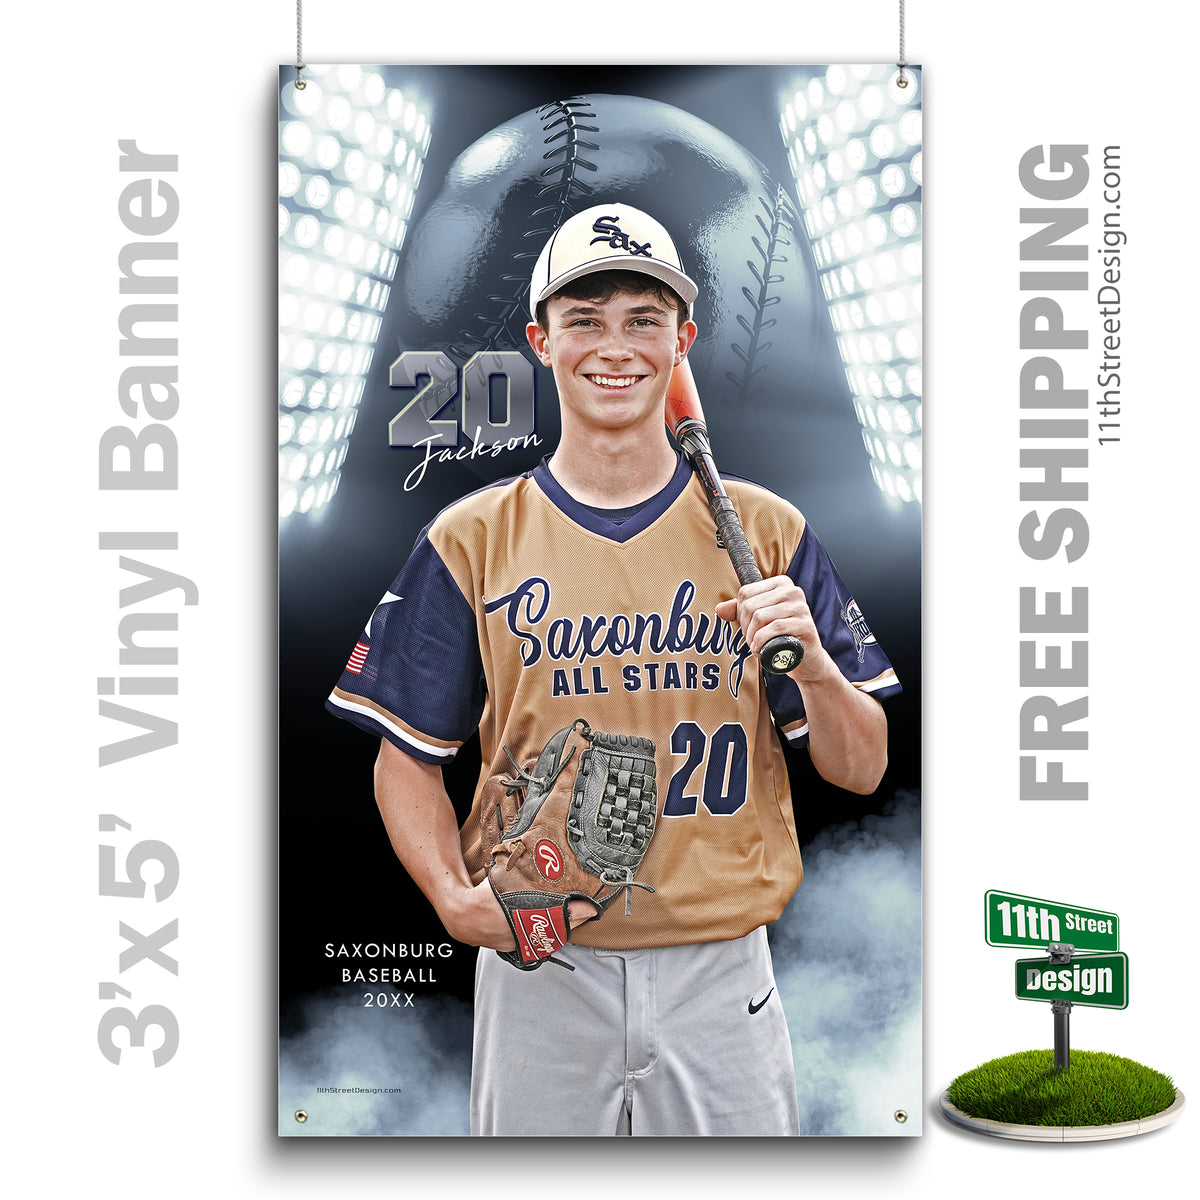 Coaches Gift, Team Gifts, Poster Print, Personalized Poster, Senior Night, Senior Poster, Sport Gift, Sports Collage, Sports Prints, Custom Sports Poster, Baseball Poster, Baseball Print, Baseball Senior